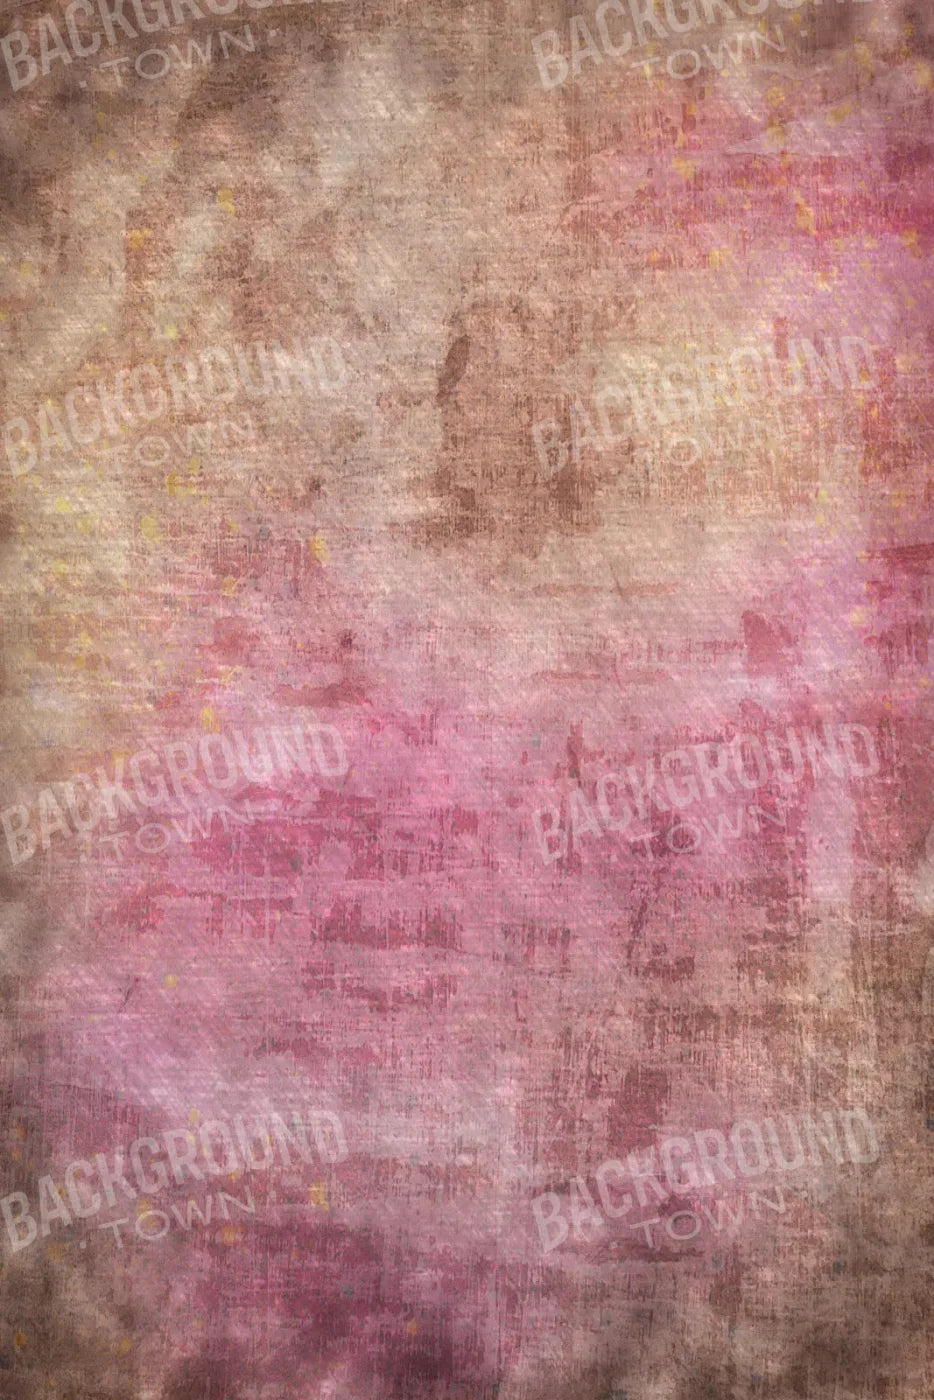 Chocoberry 5X8 Ultracloth ( 60 X 96 Inch ) Backdrop